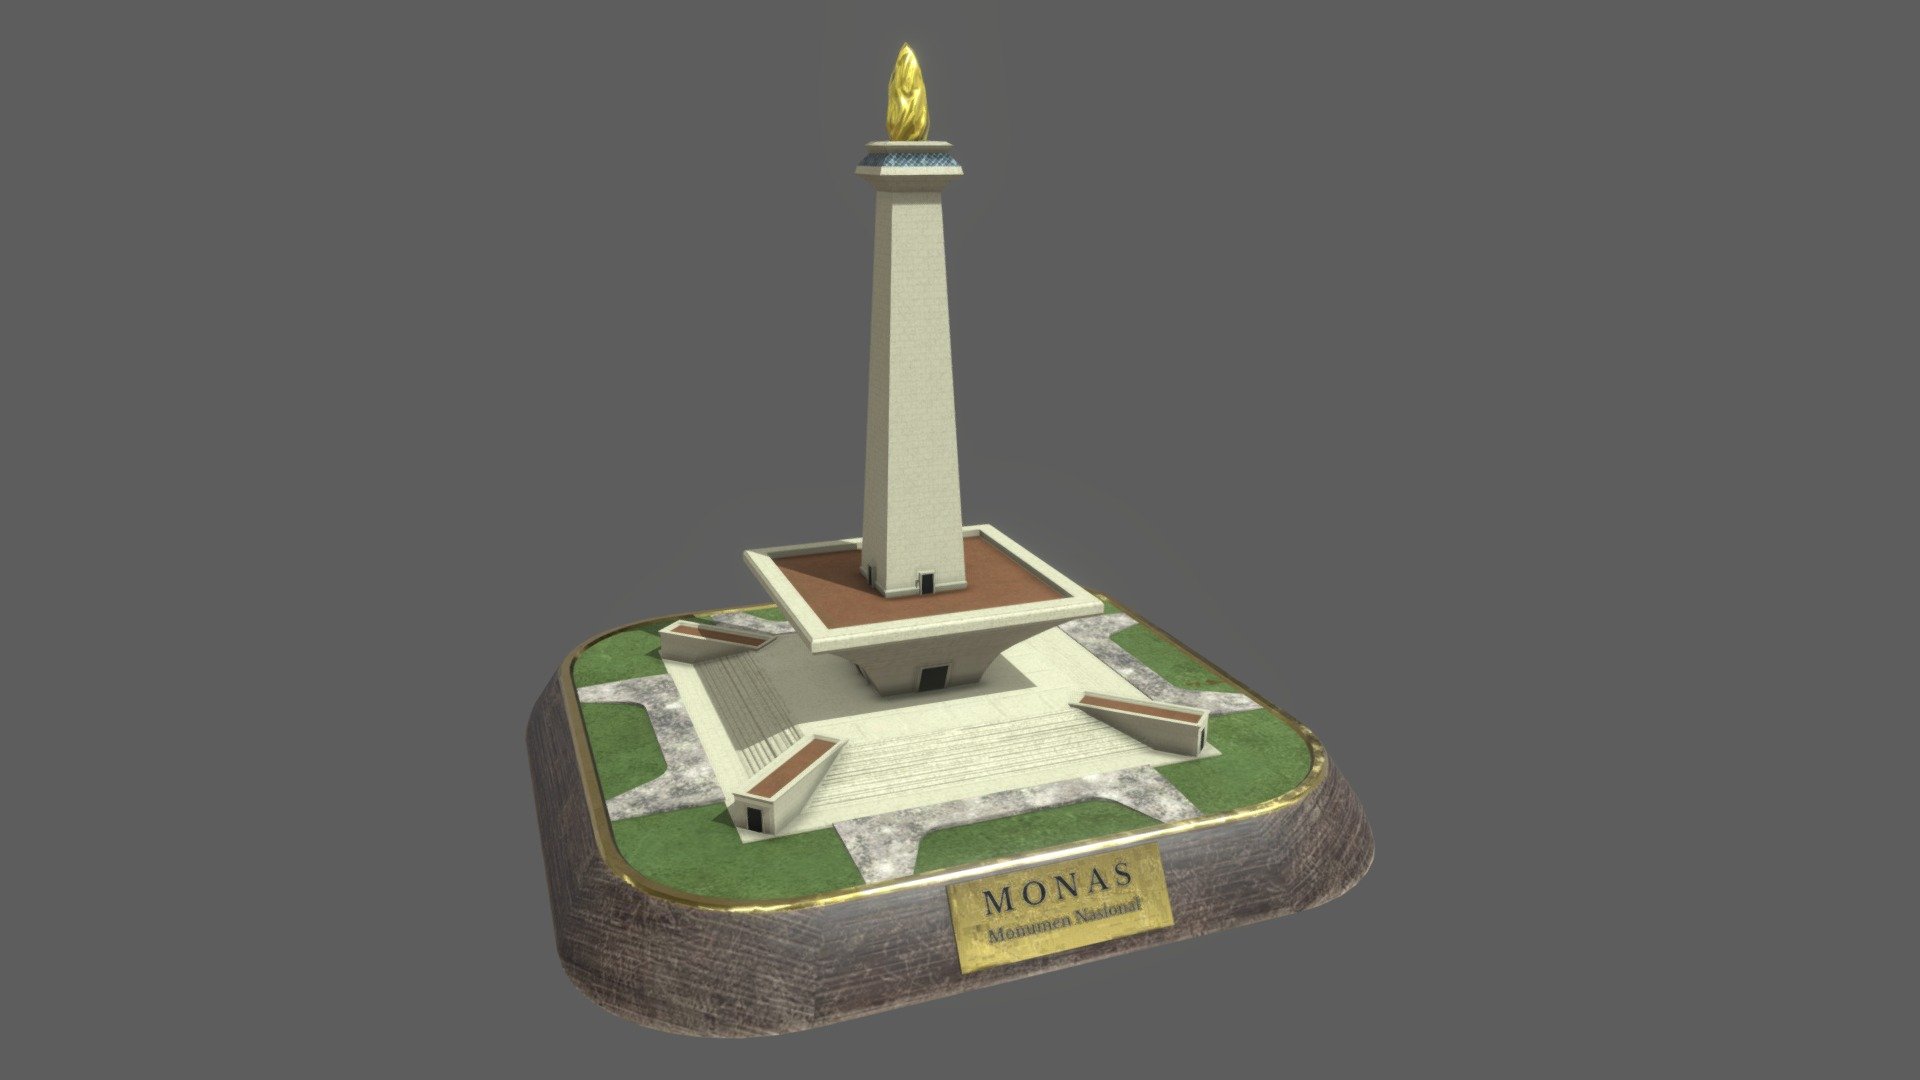 A figurine model of the Monumen Nasional (Monas), a large obelisk located in the center of Jakarta, Indonesia. Stylized lightly with aesthetics in mind, as such the dimensions/ratios don't really conform to the actual monument. Partially inspired by the Civilization 6 artstyle (though I did not nail it exactly).

Was created as a test of my modelling/texturing abilities, I'm quite happy with the outcome, while it did not precisely adhere to the idea I had in mind, it was quite good regardless.

Modelled in Blender and textured in Substance Painter 3d model